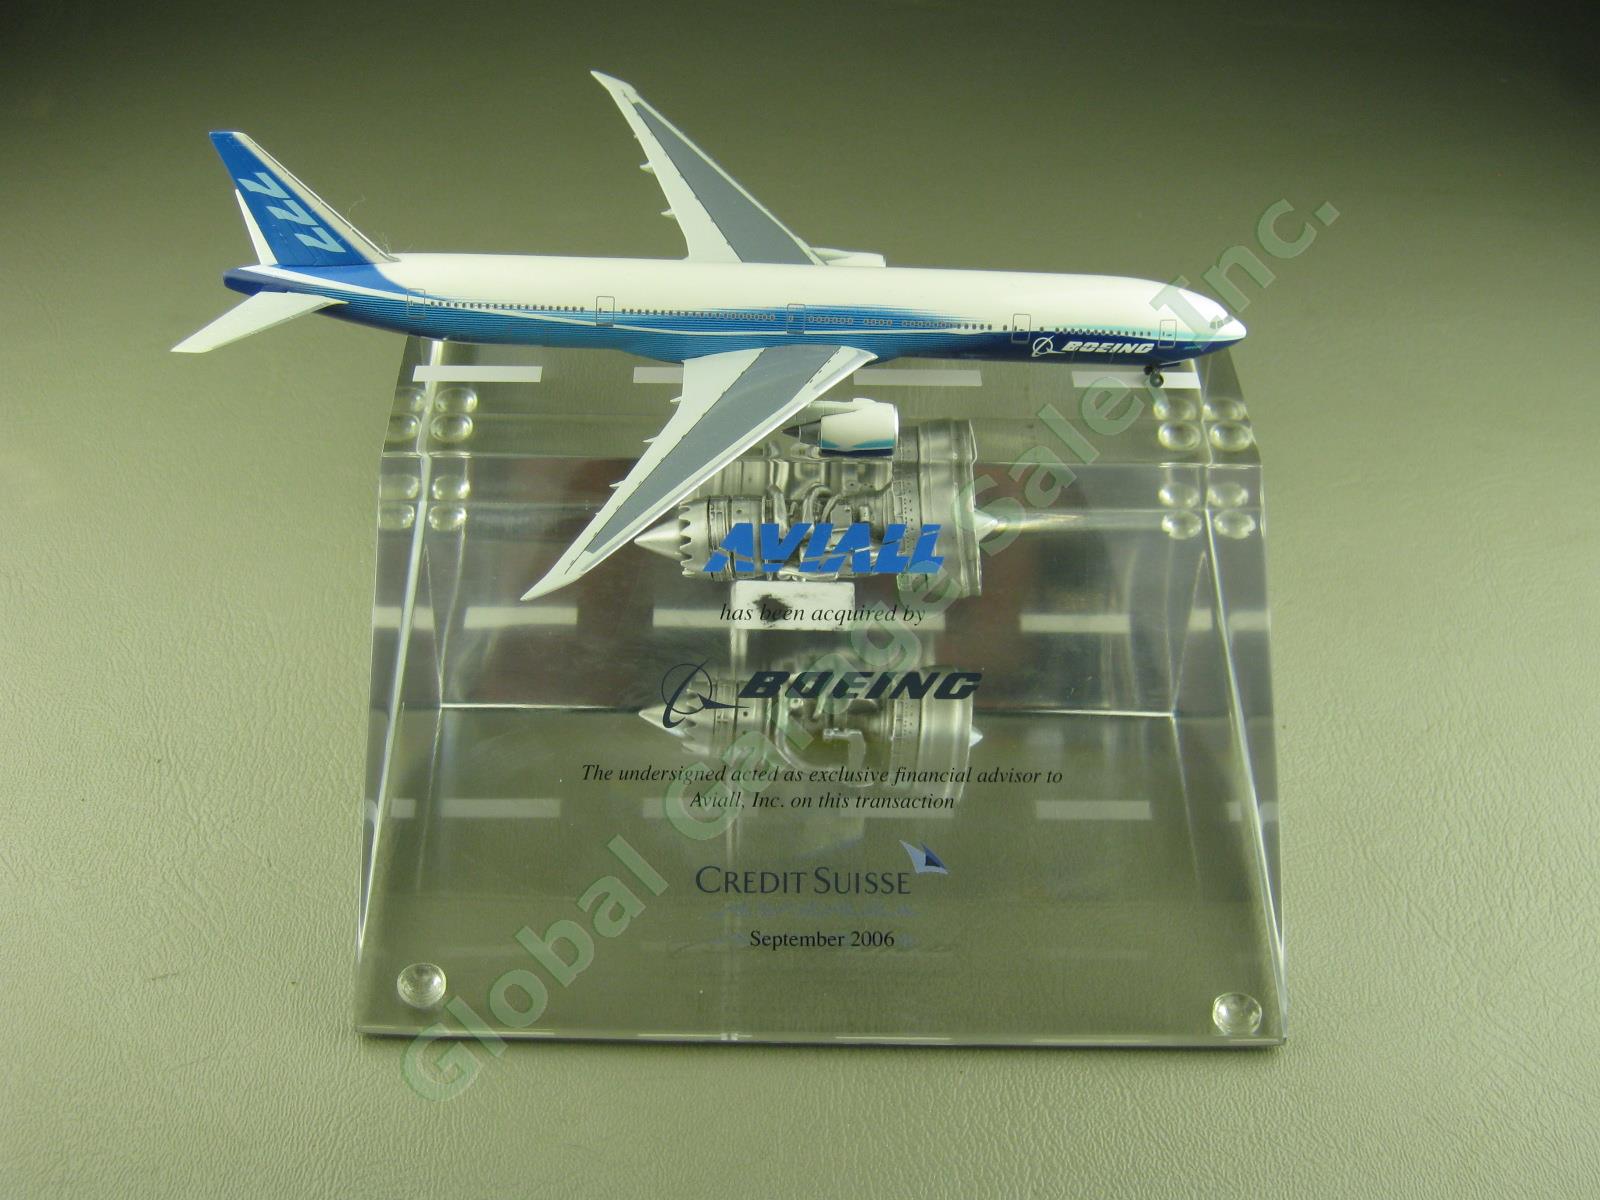 2006 Boeing Aviall Credit Suisse Paperweight 777 Airplane Engine Lucite Acrylic